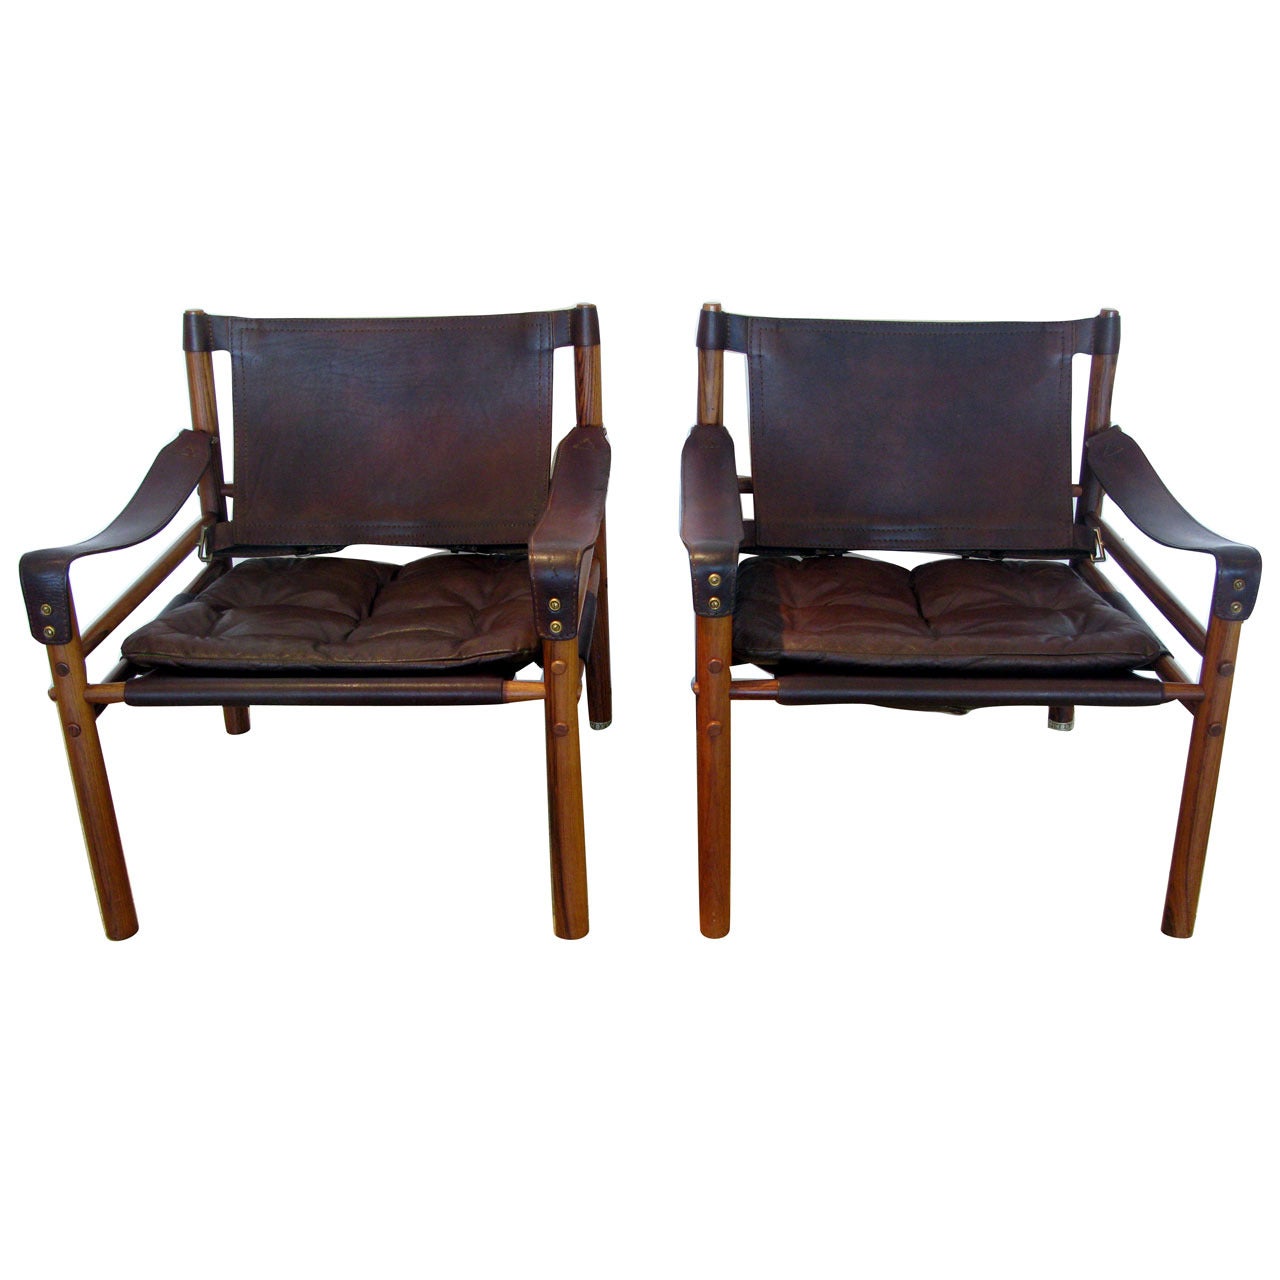 Pair of Arne Norell Sirocco "Safari" Chairs